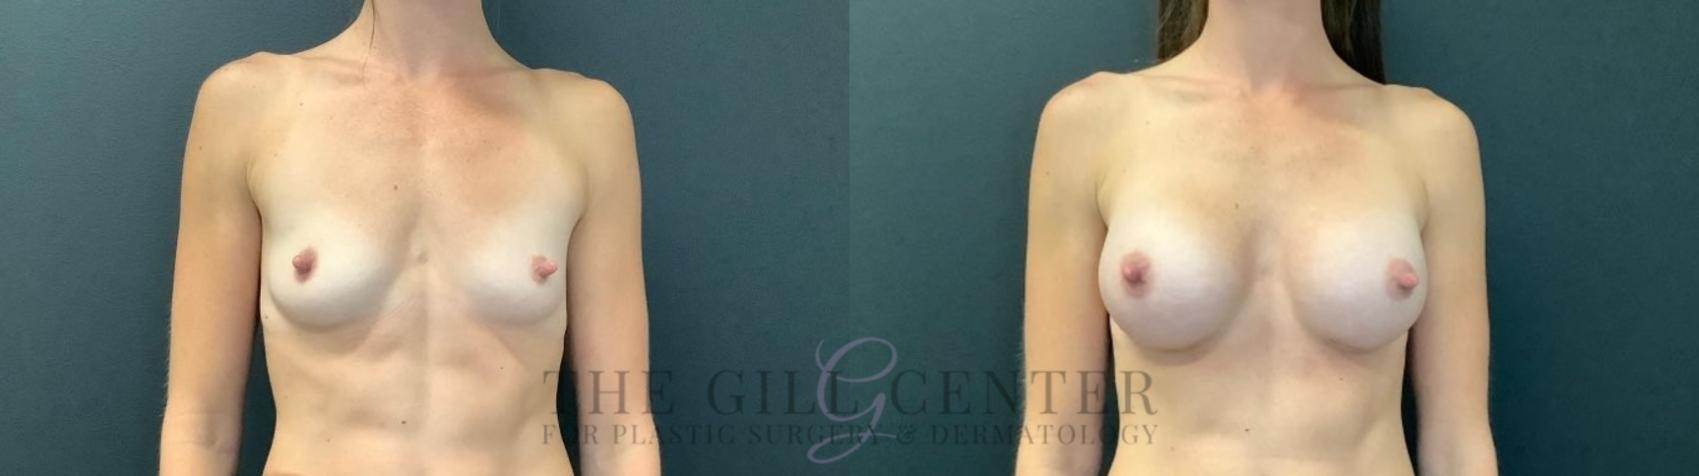 Breast Augmentation Case 477 Before & After Front | The Woodlands, TX | The Gill Center for Plastic Surgery and Dermatology